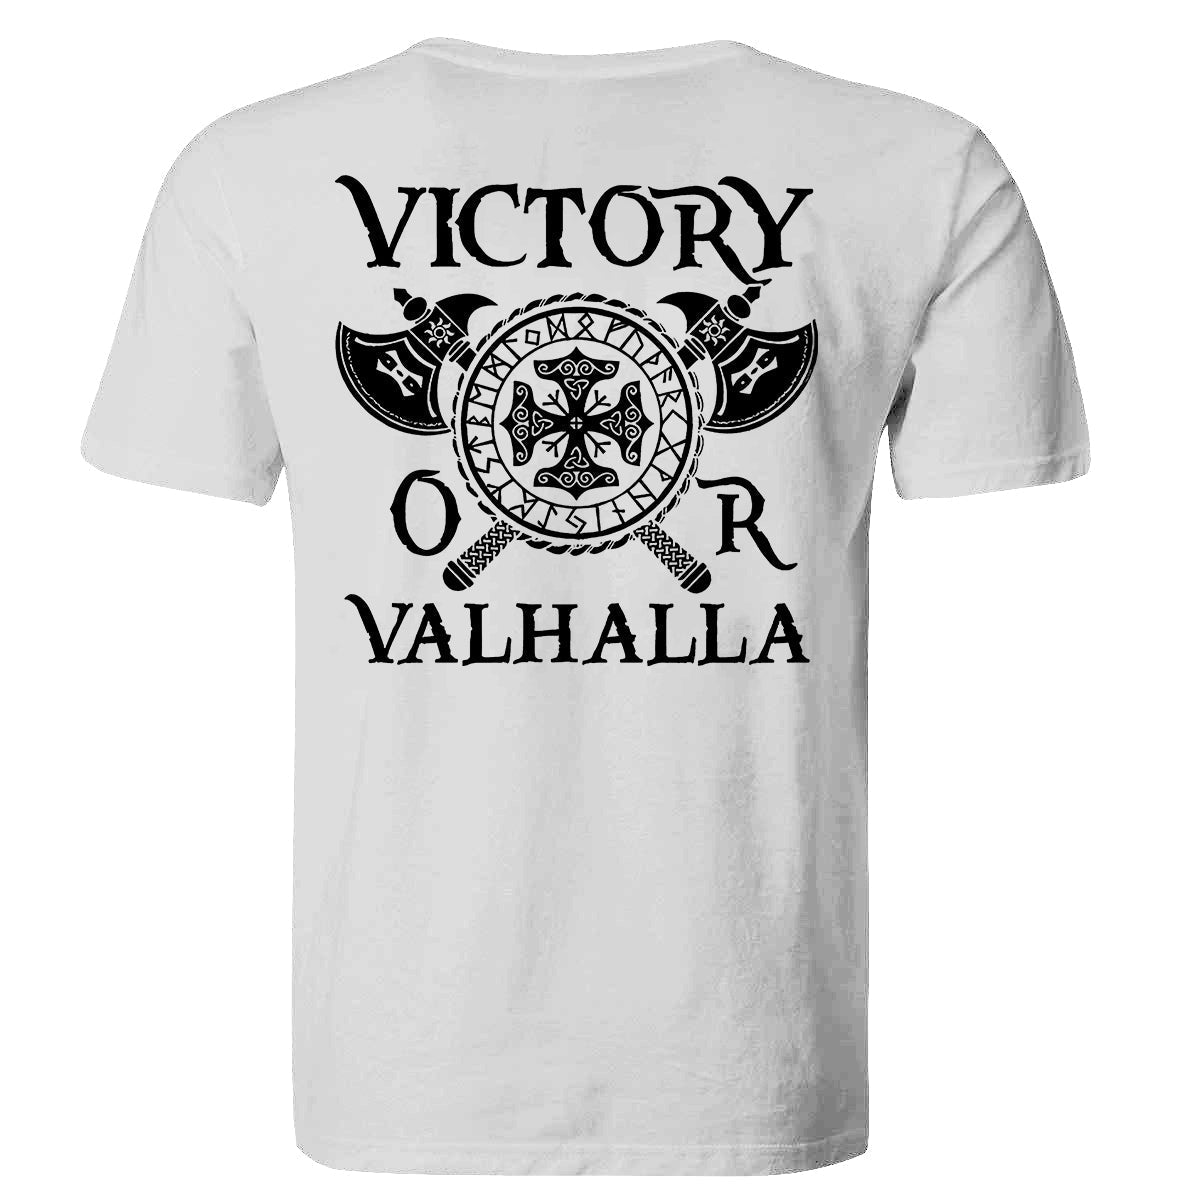 GrootWear Victory Letter Axes Printed Men's T-shirt